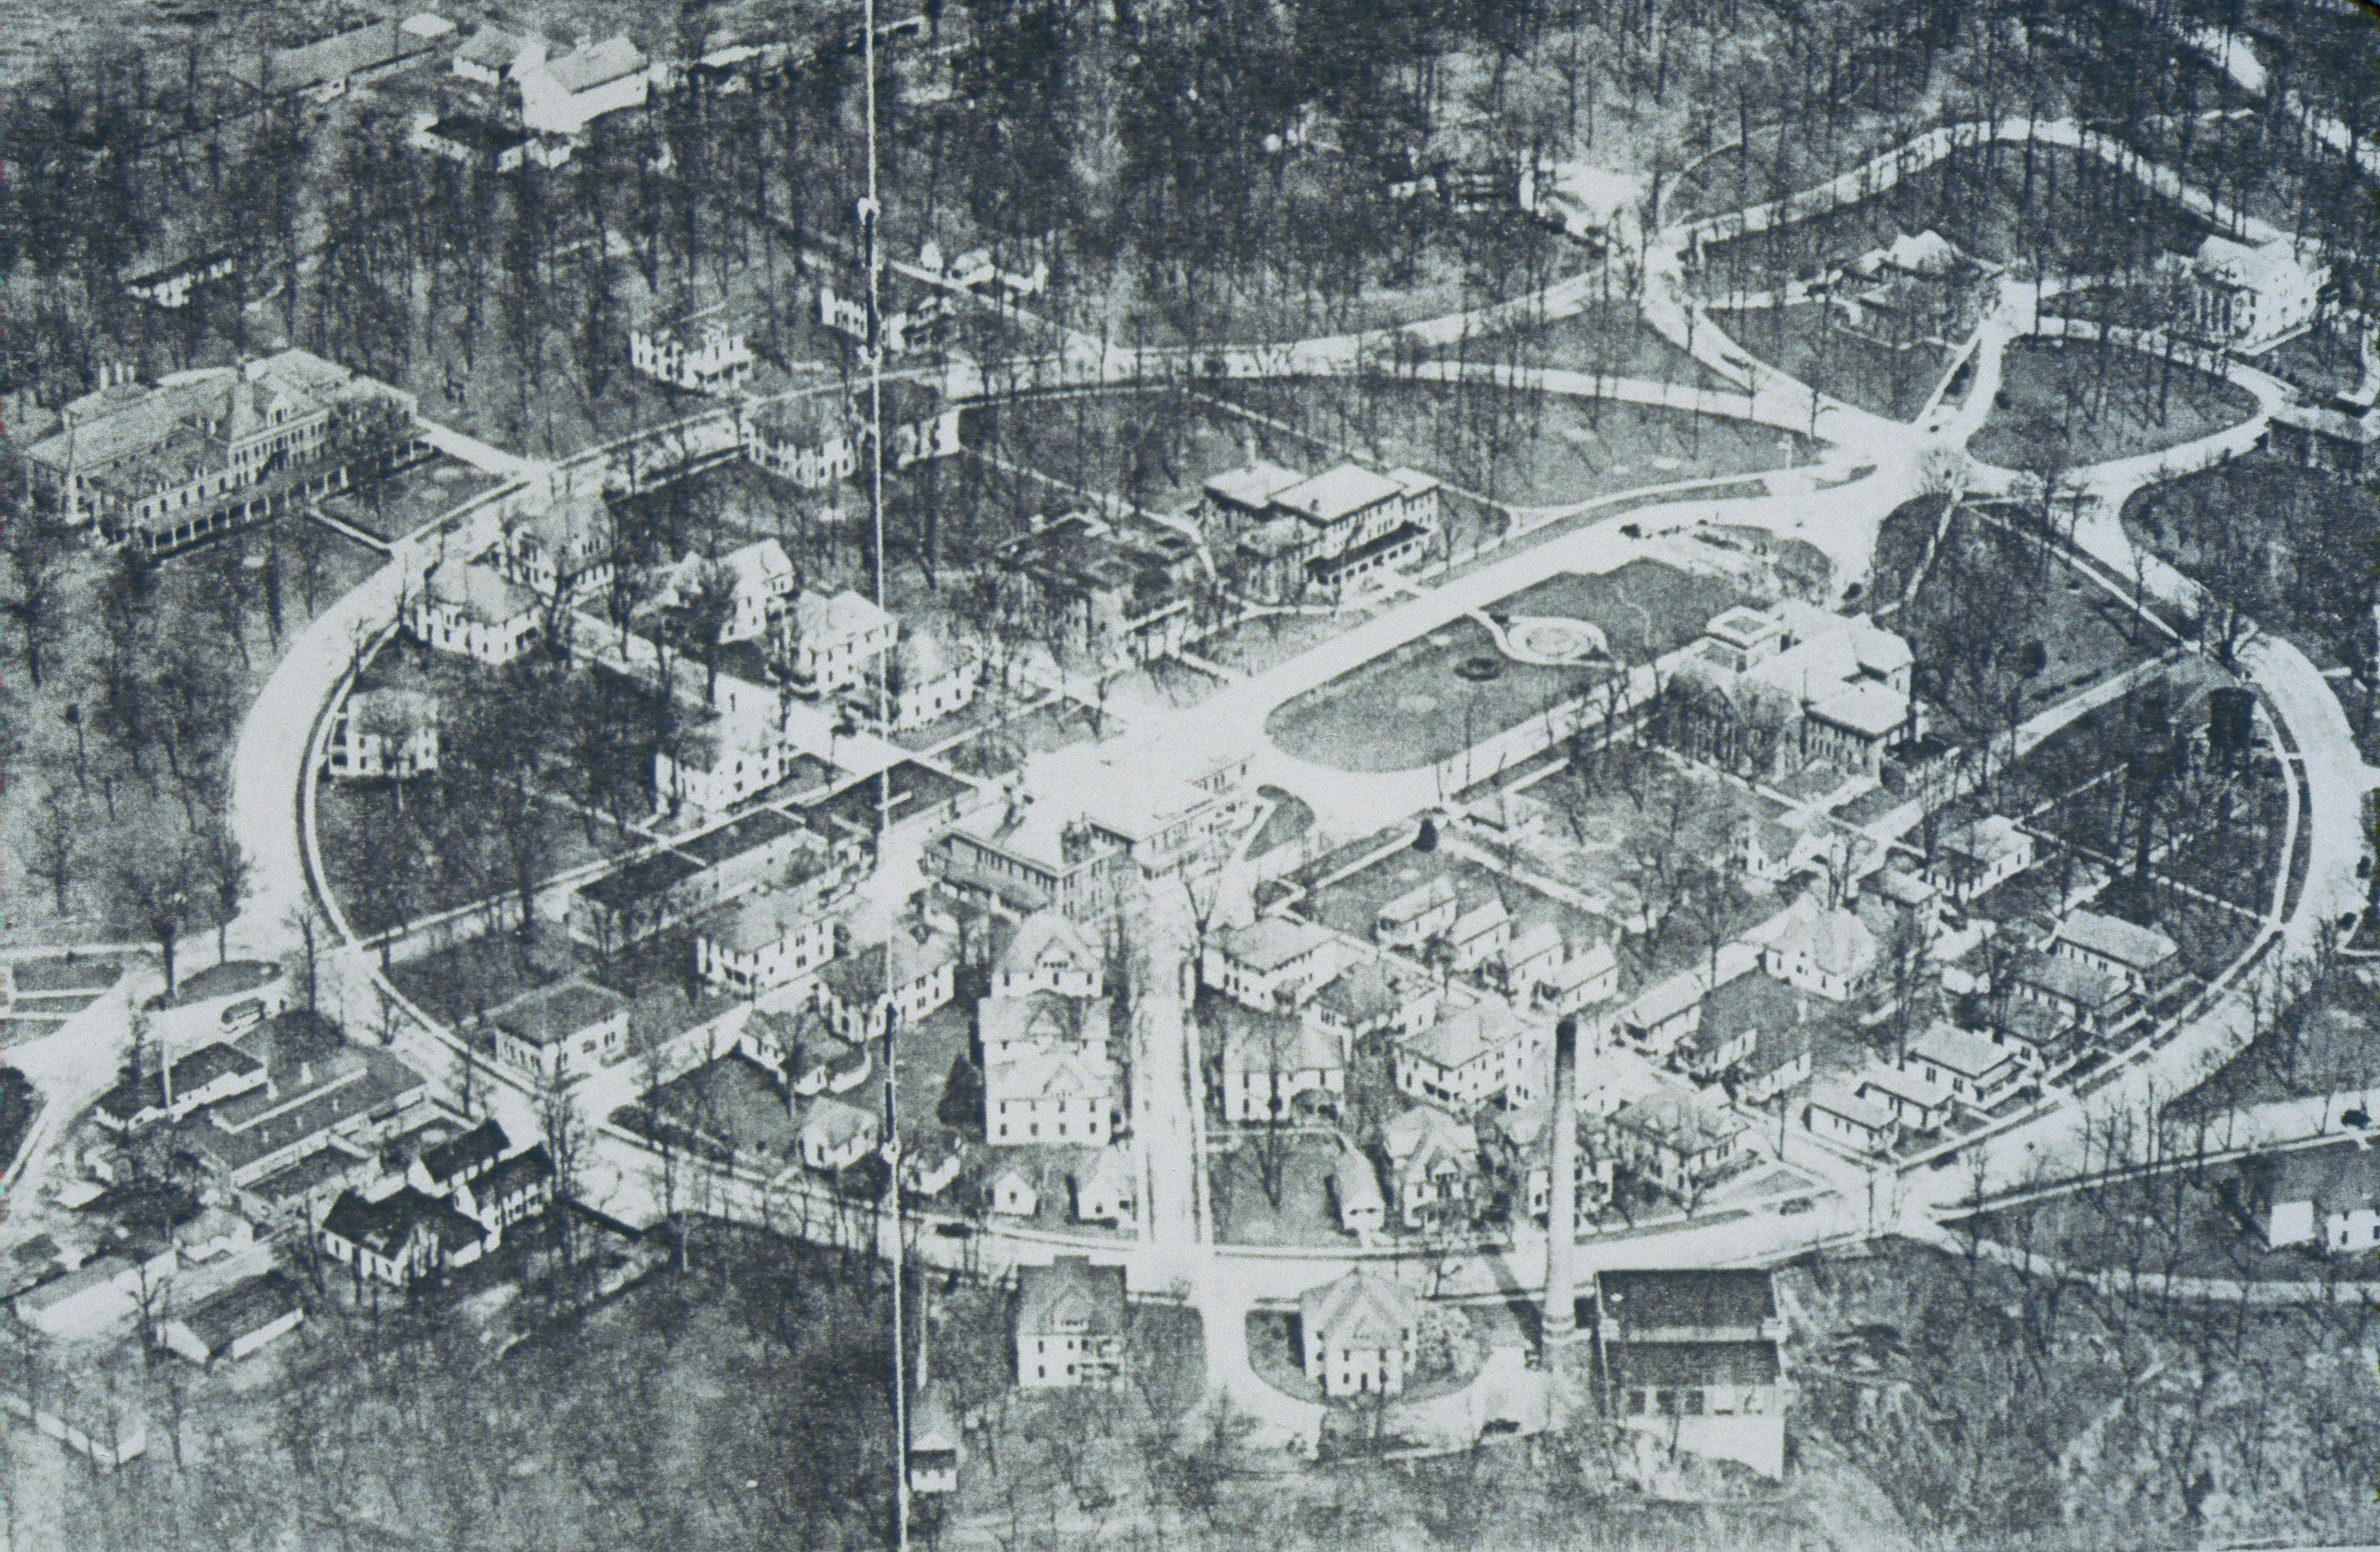 Historical black and white overhead picture of the IVH campus.